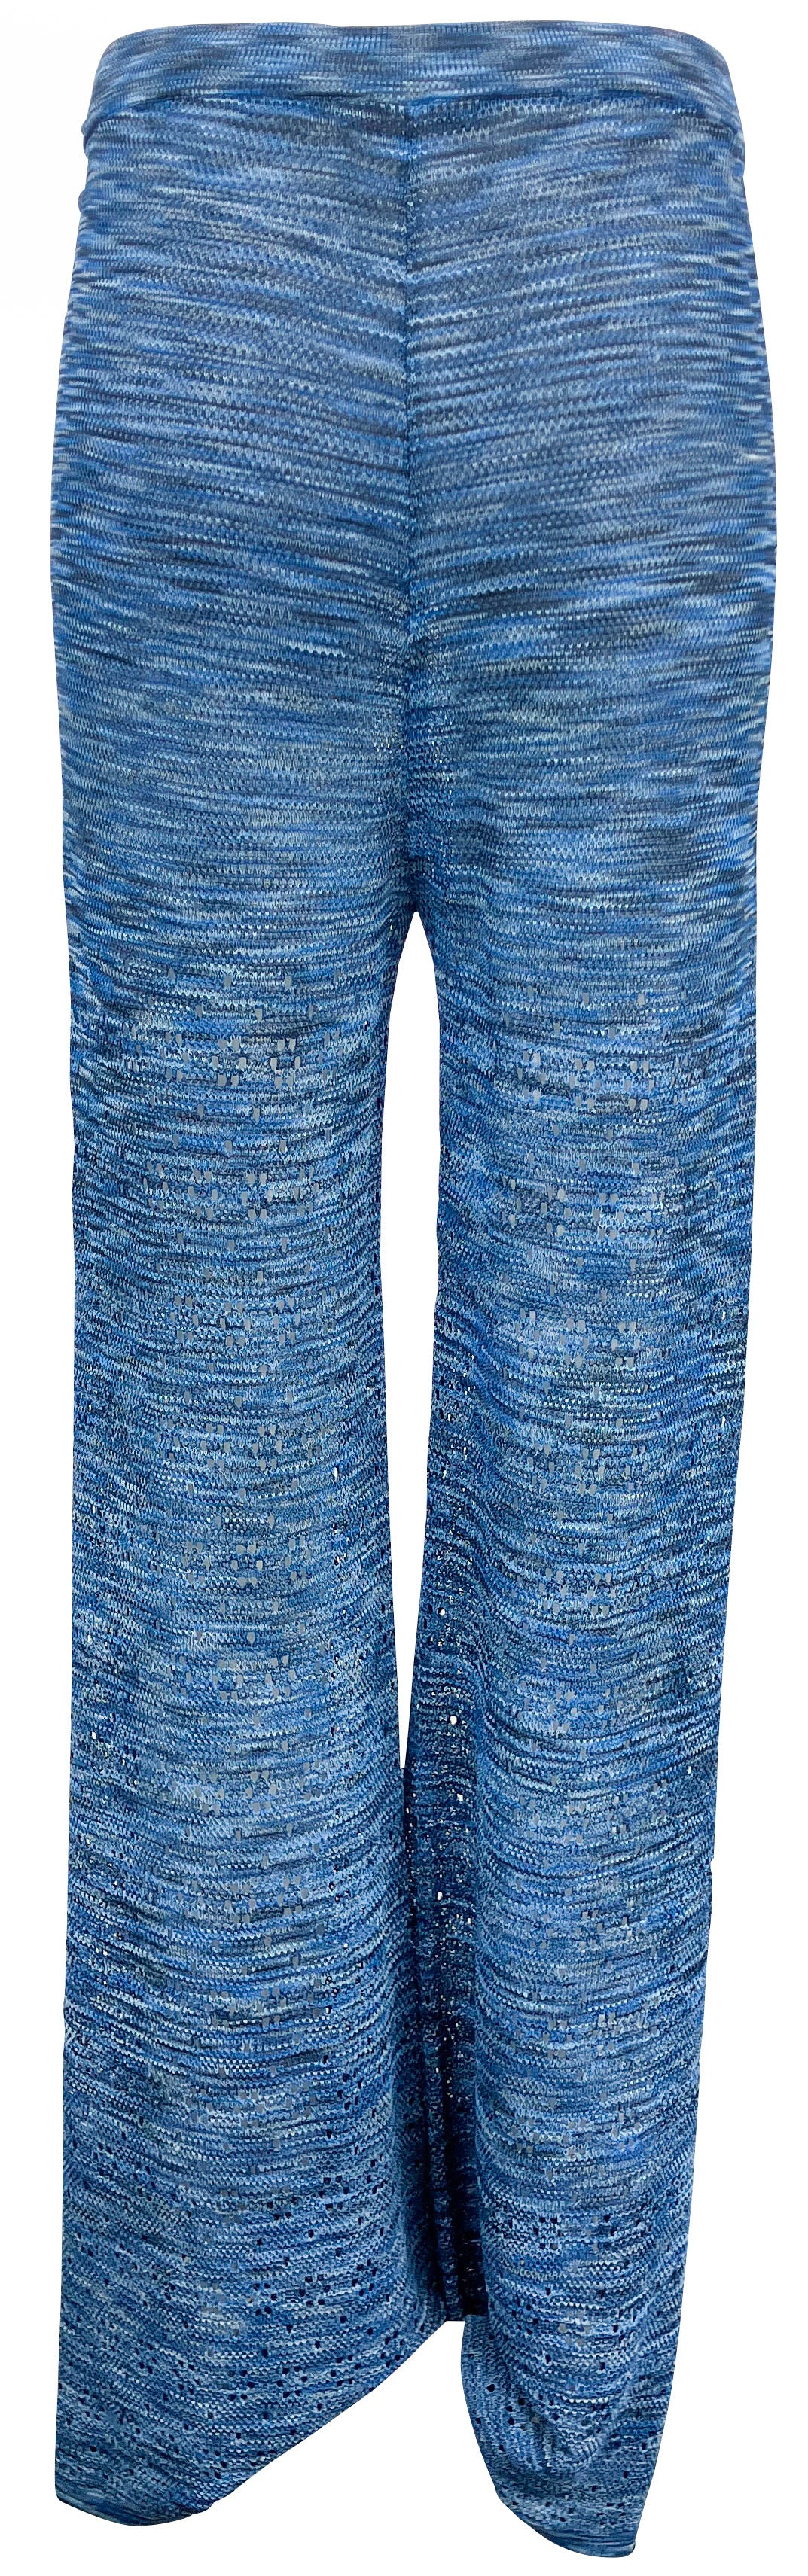 Ciao Lucia! Space Dye Crochet Santino Pant in Wave - Discounts on Ciao Lucia! at UAL